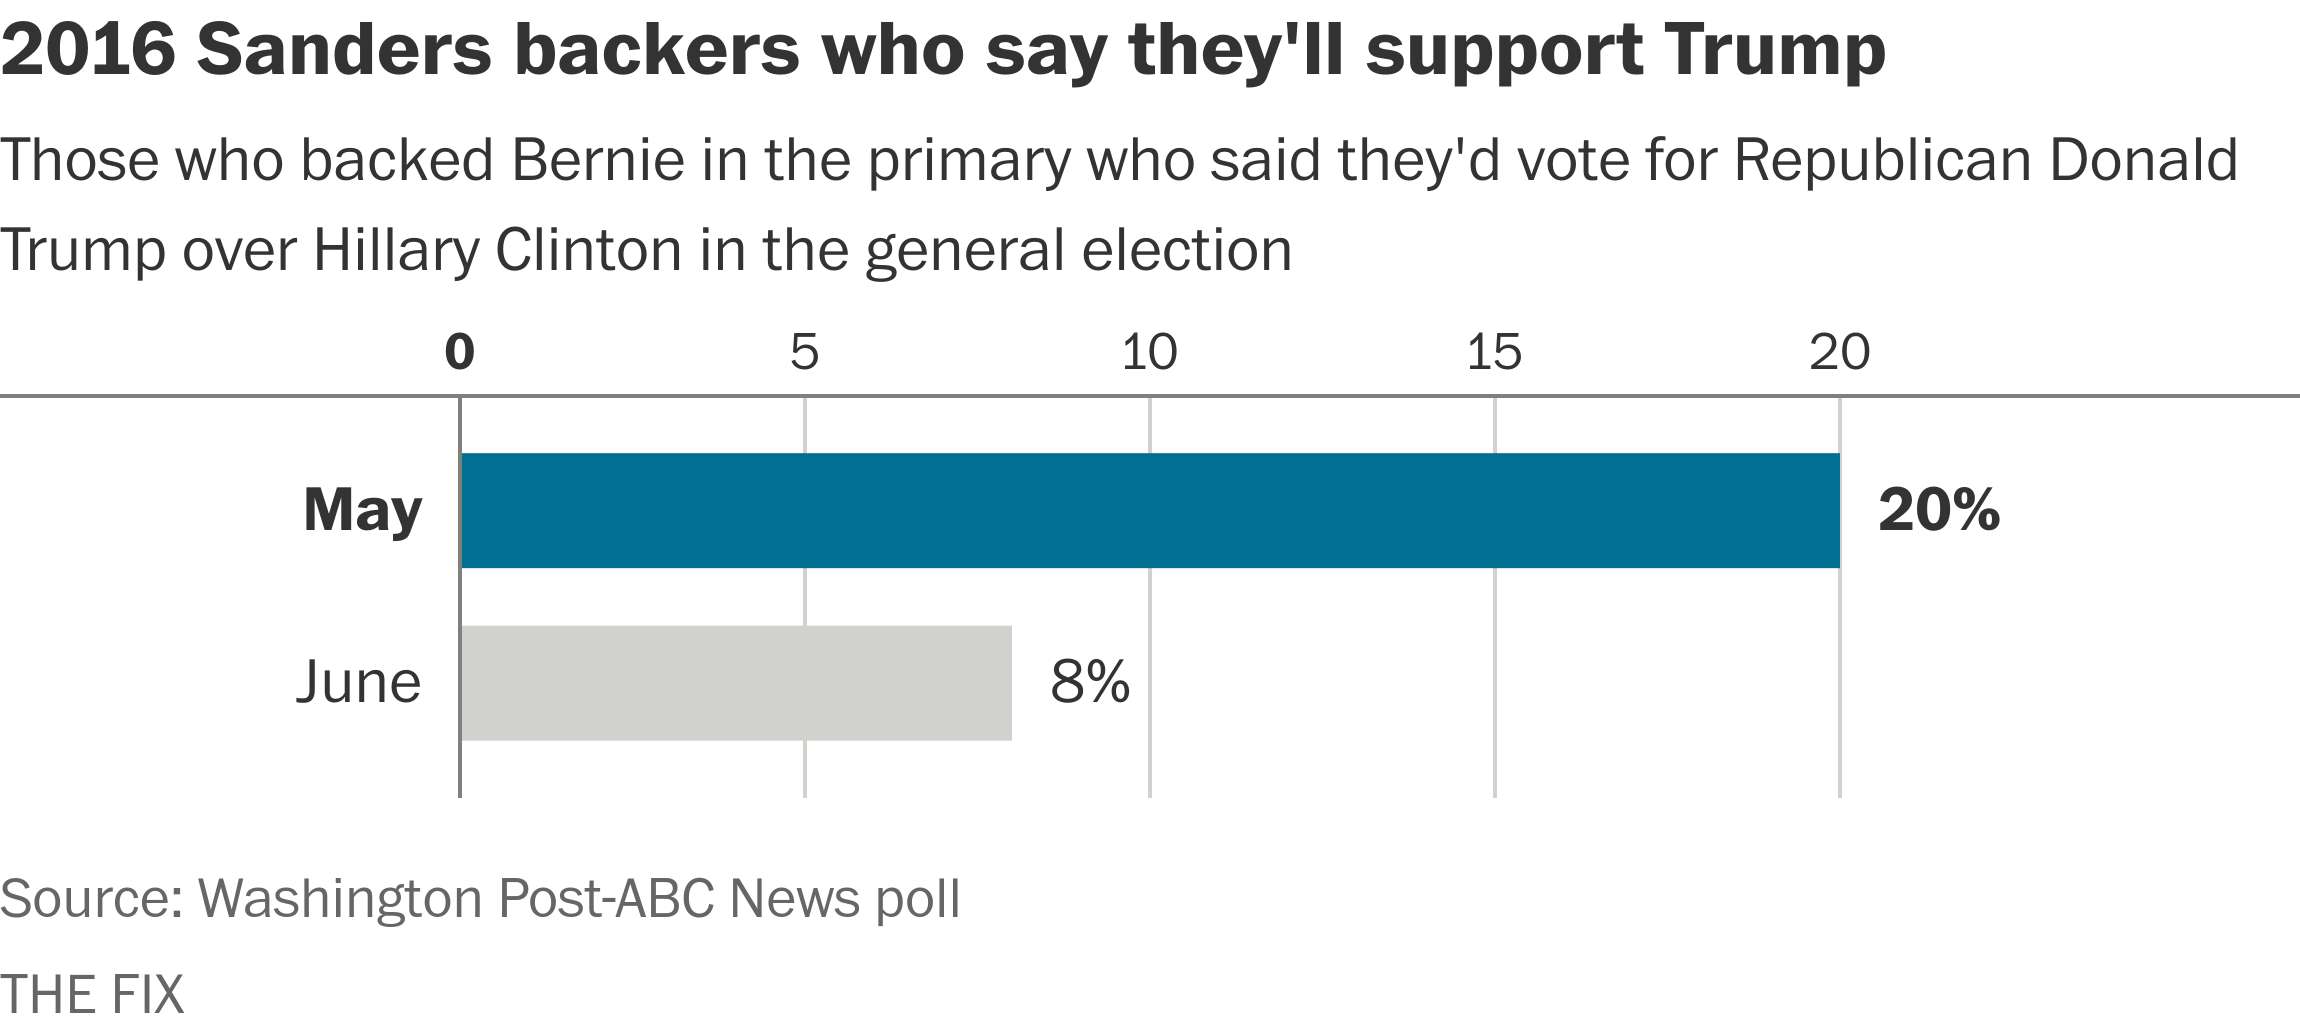 Sanders supporters flock to Clinton ahead of general election, according to new poll. 